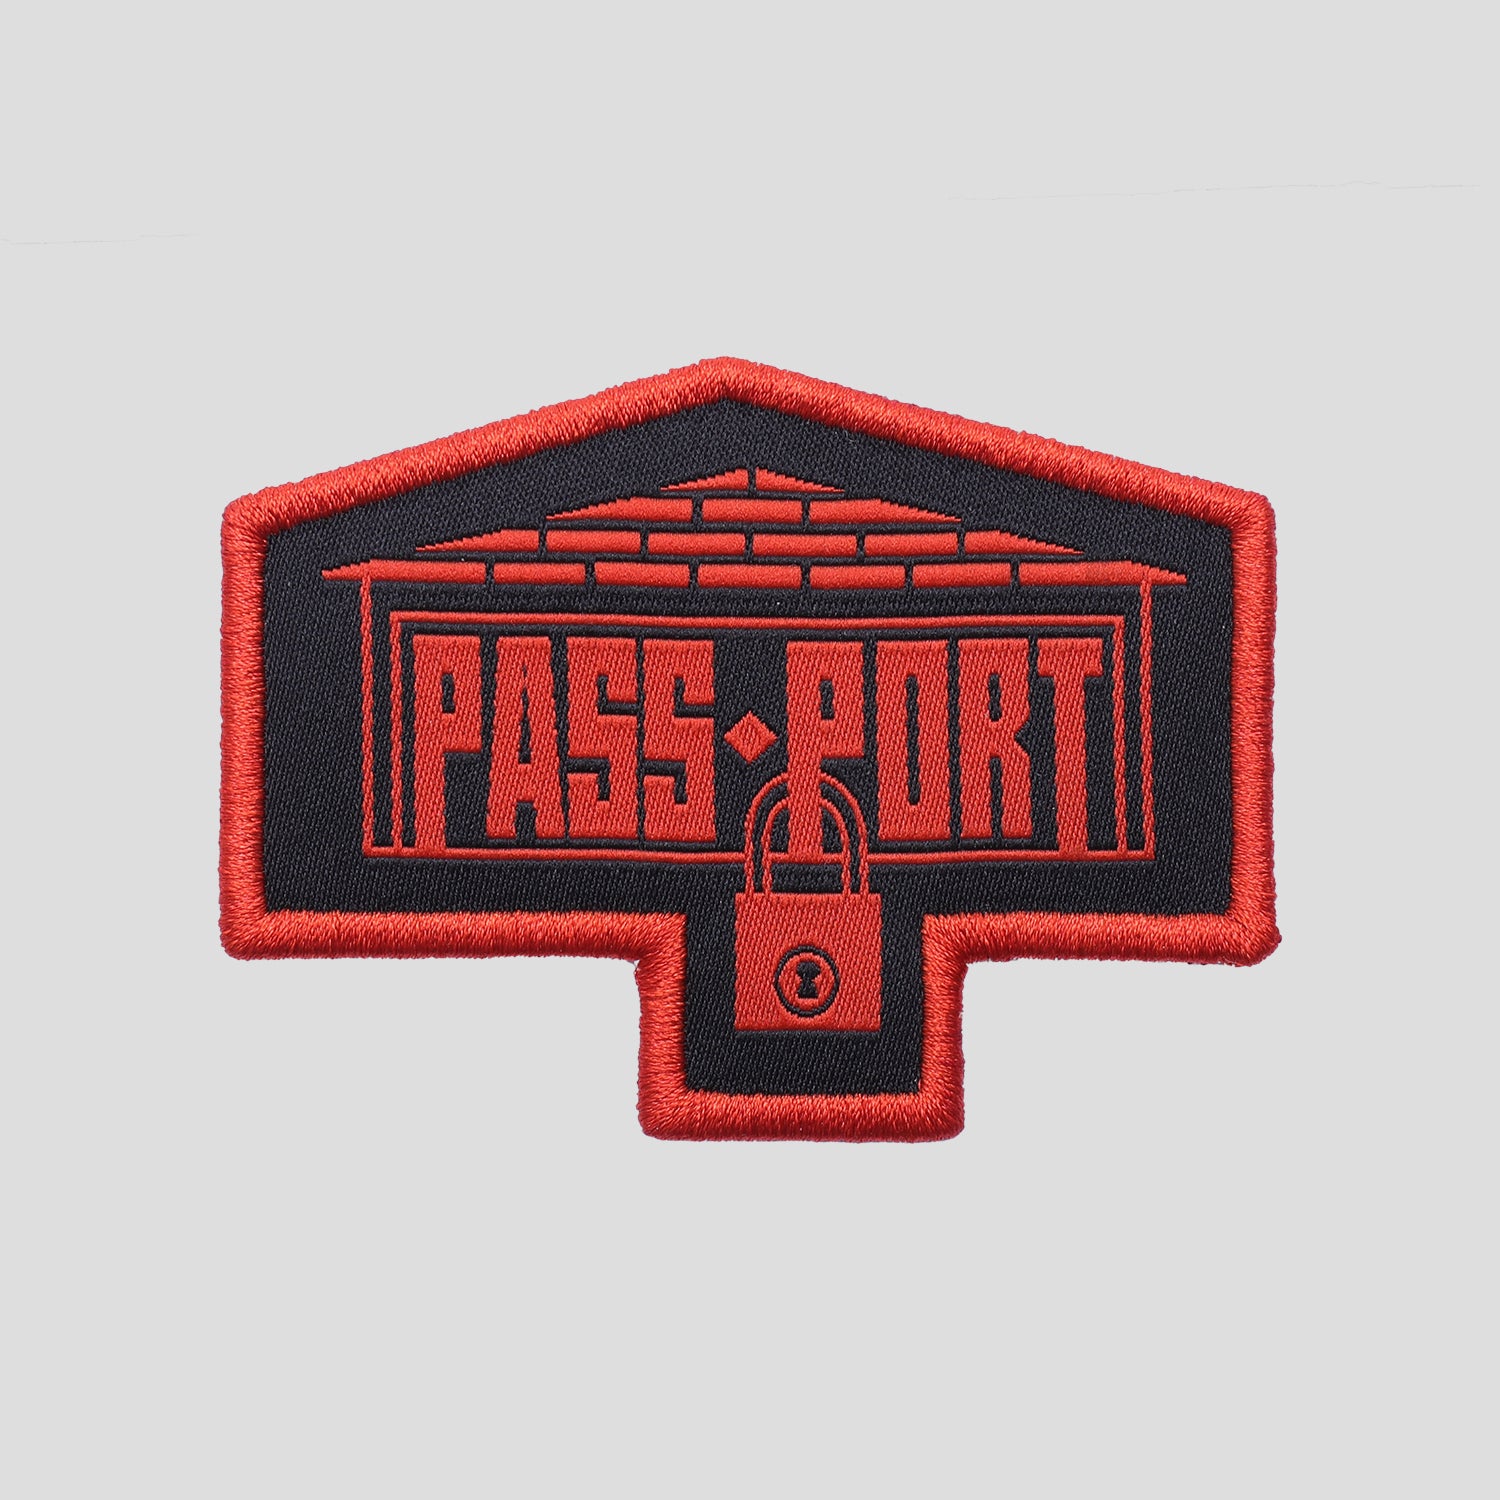 Pass~Port Depot Embroidered Patch